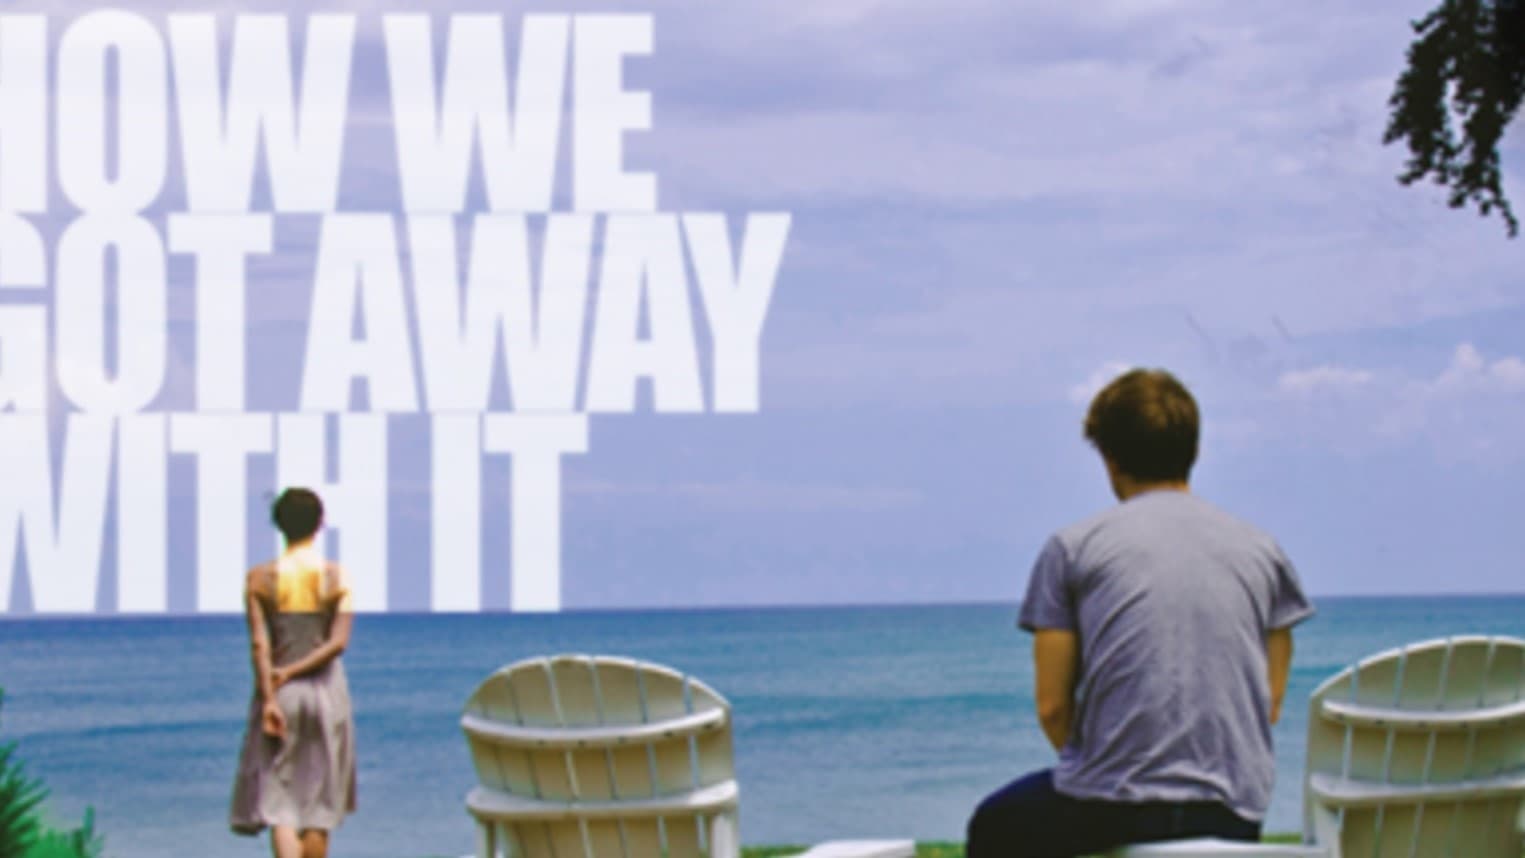 How We Got Away with It 2014 123movies